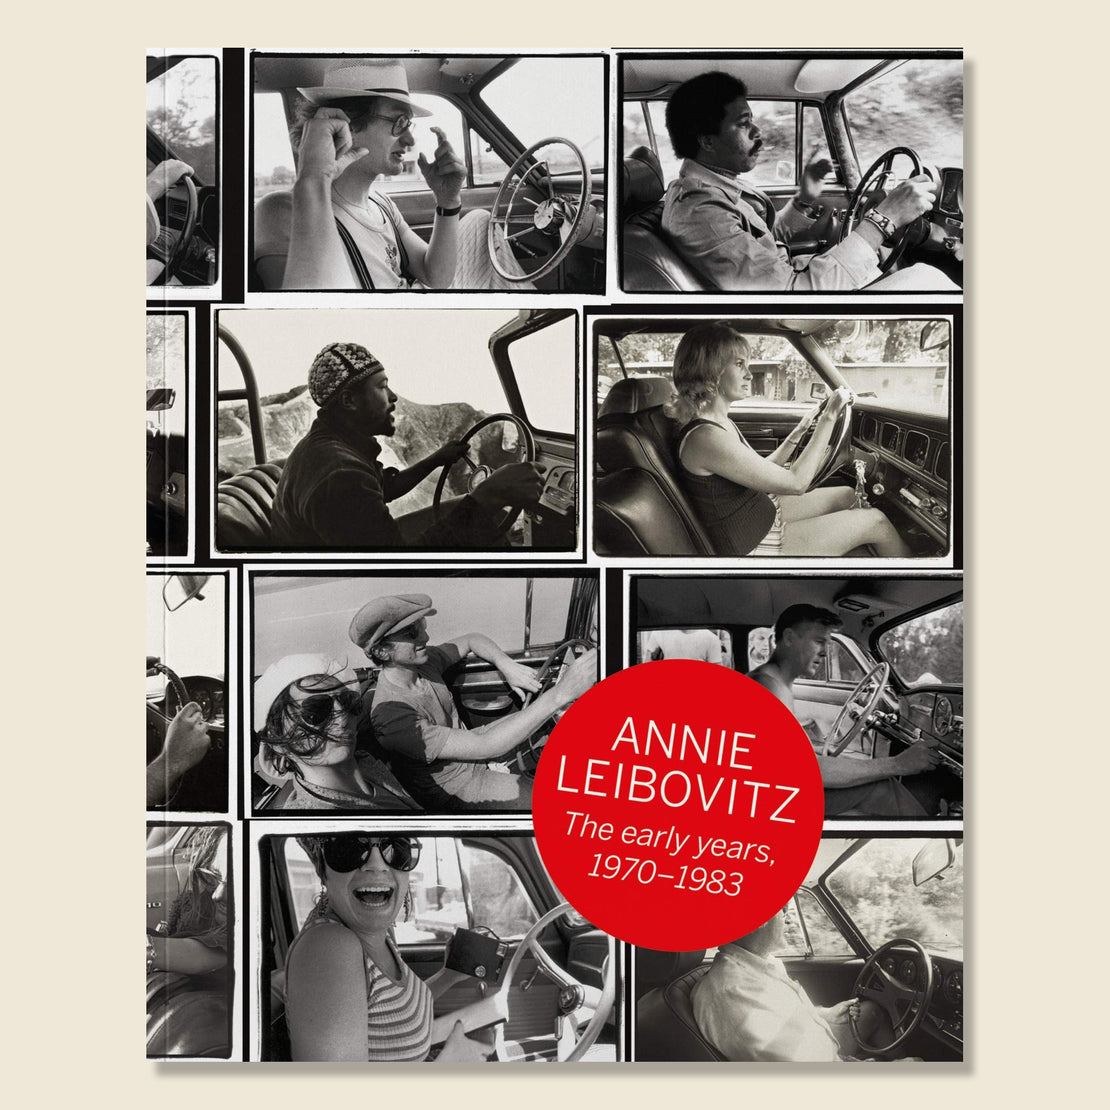 Bookstore Annie Leibovitz: The Early Years, 1970-1983